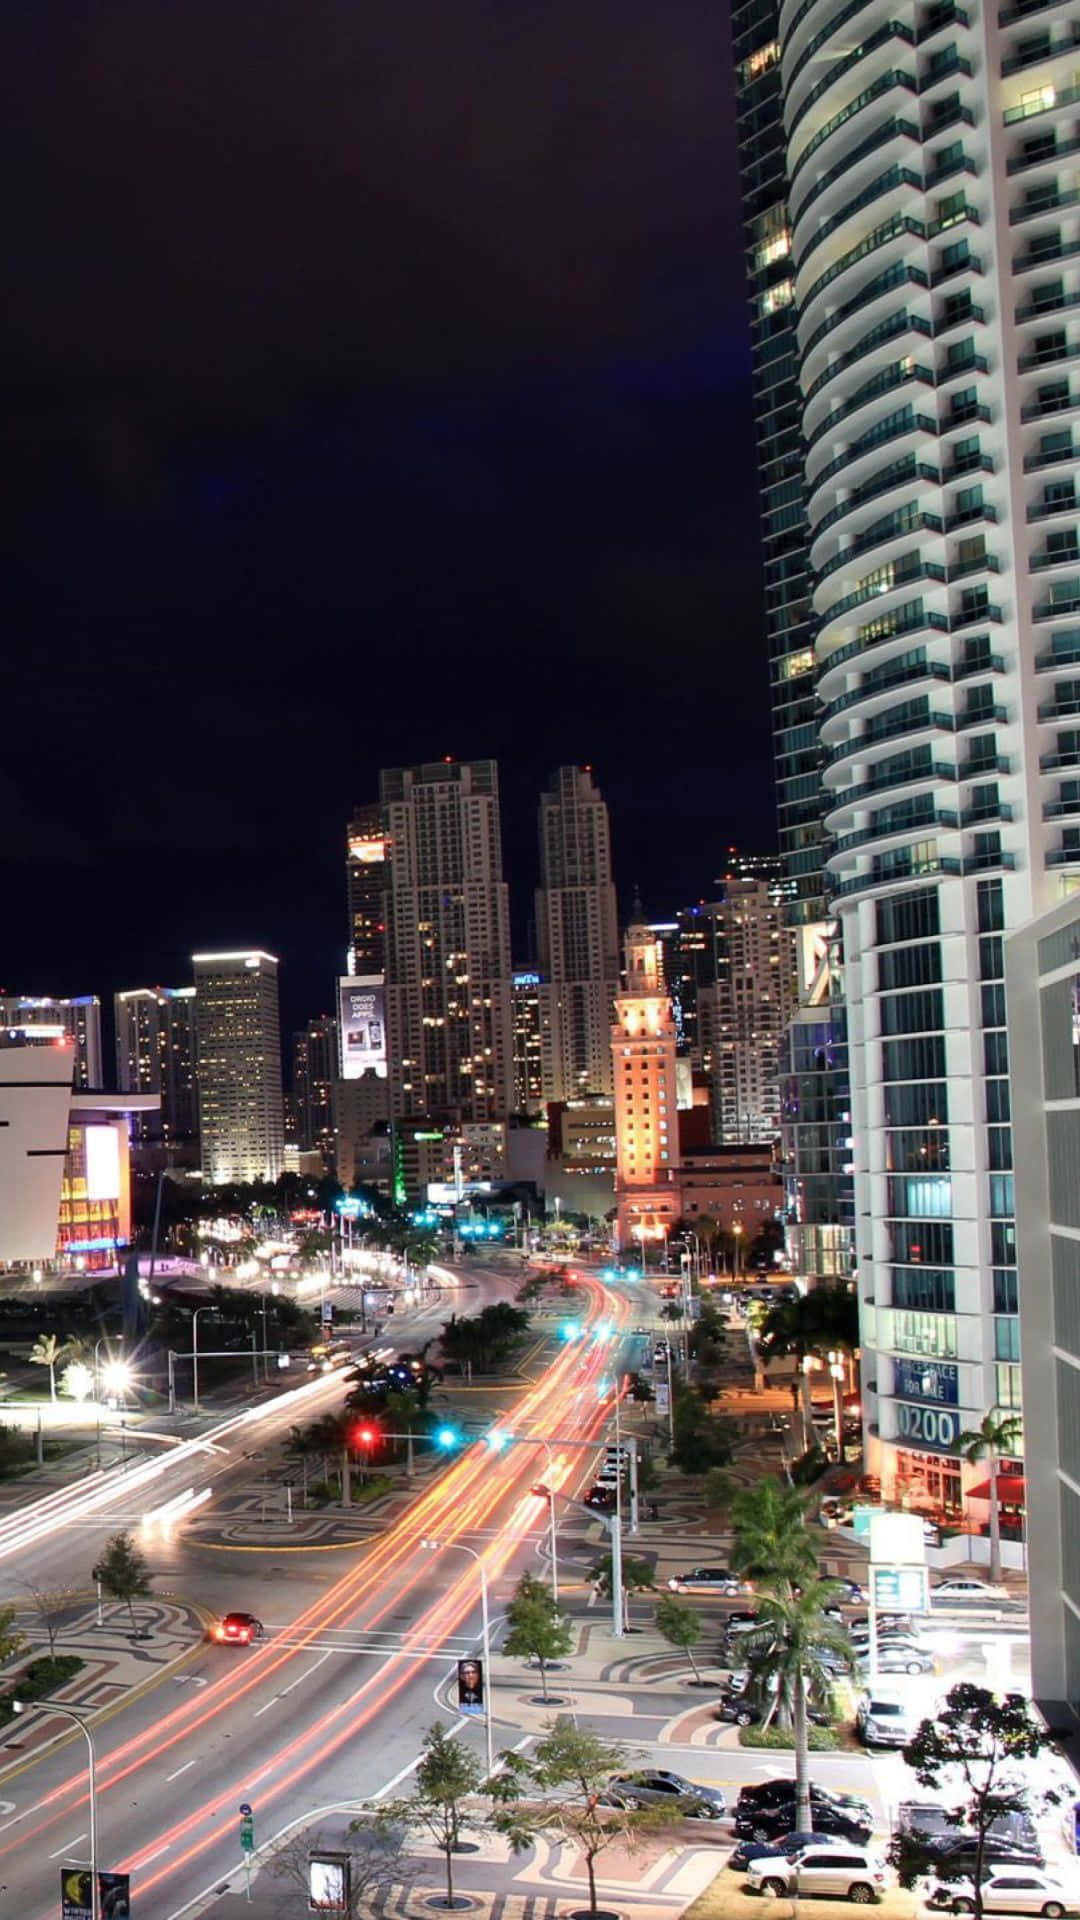 Explore the beauty of Miami with your Iphone Wallpaper